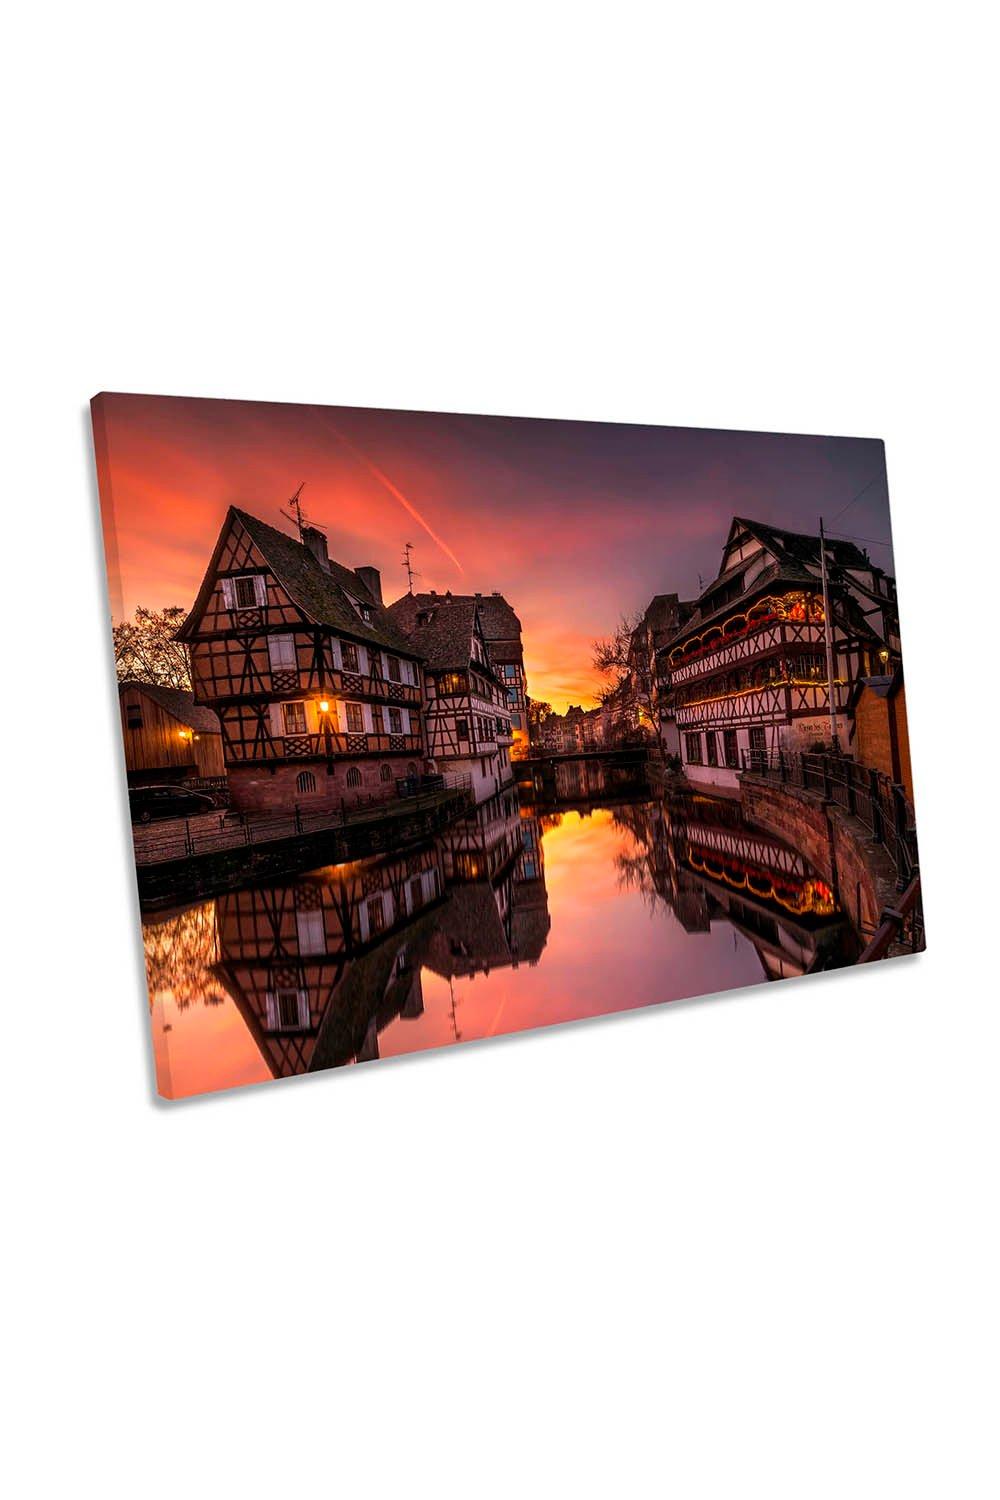 Unbreakable Beauty Strasbourg Sunset Canvas Wall Art Picture Print